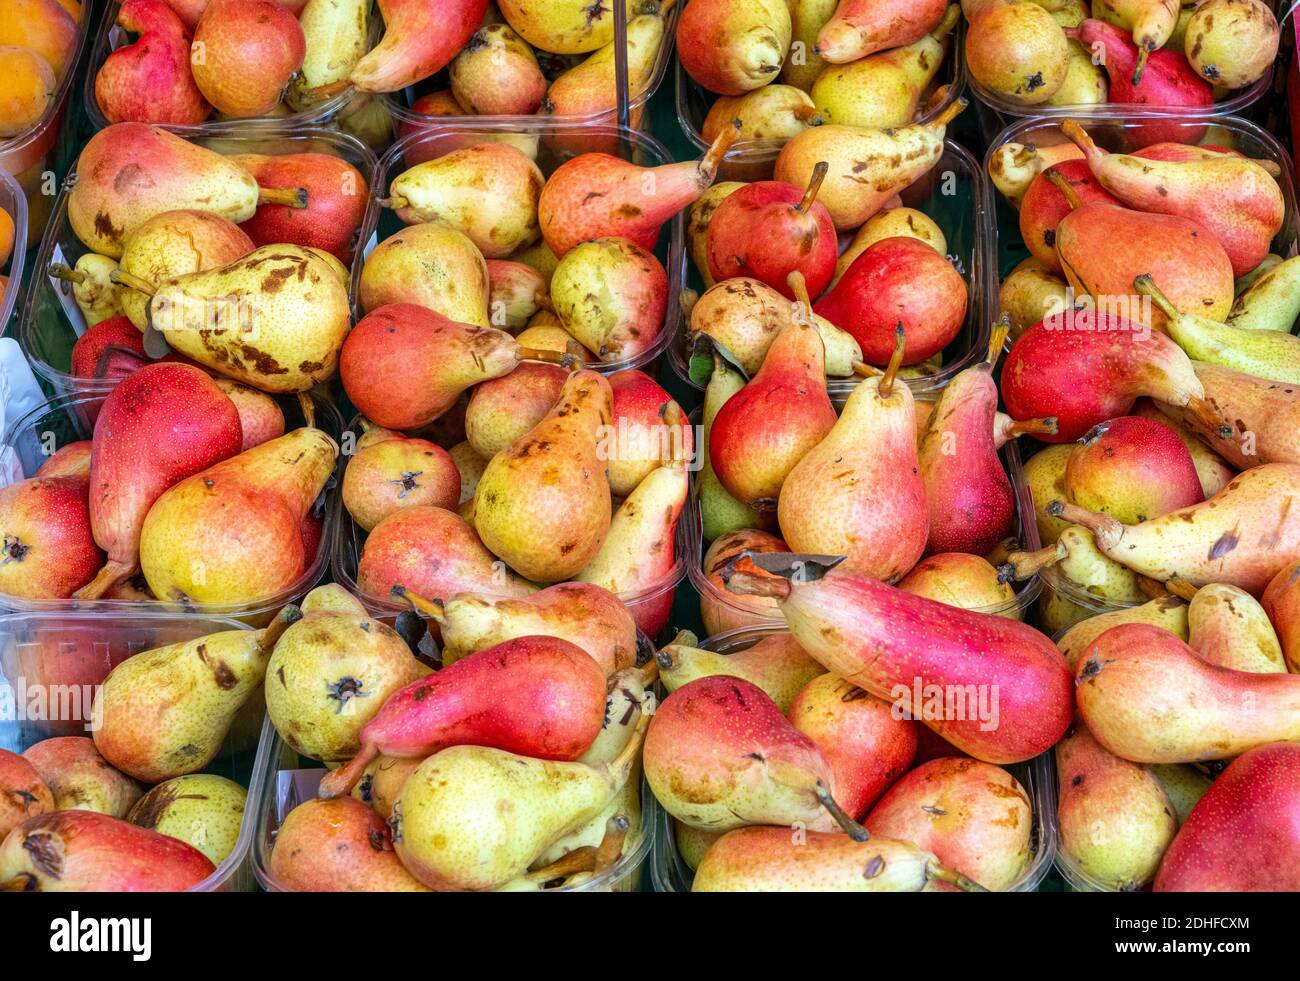 Red and yellow pears for sale at a market Stock Photo